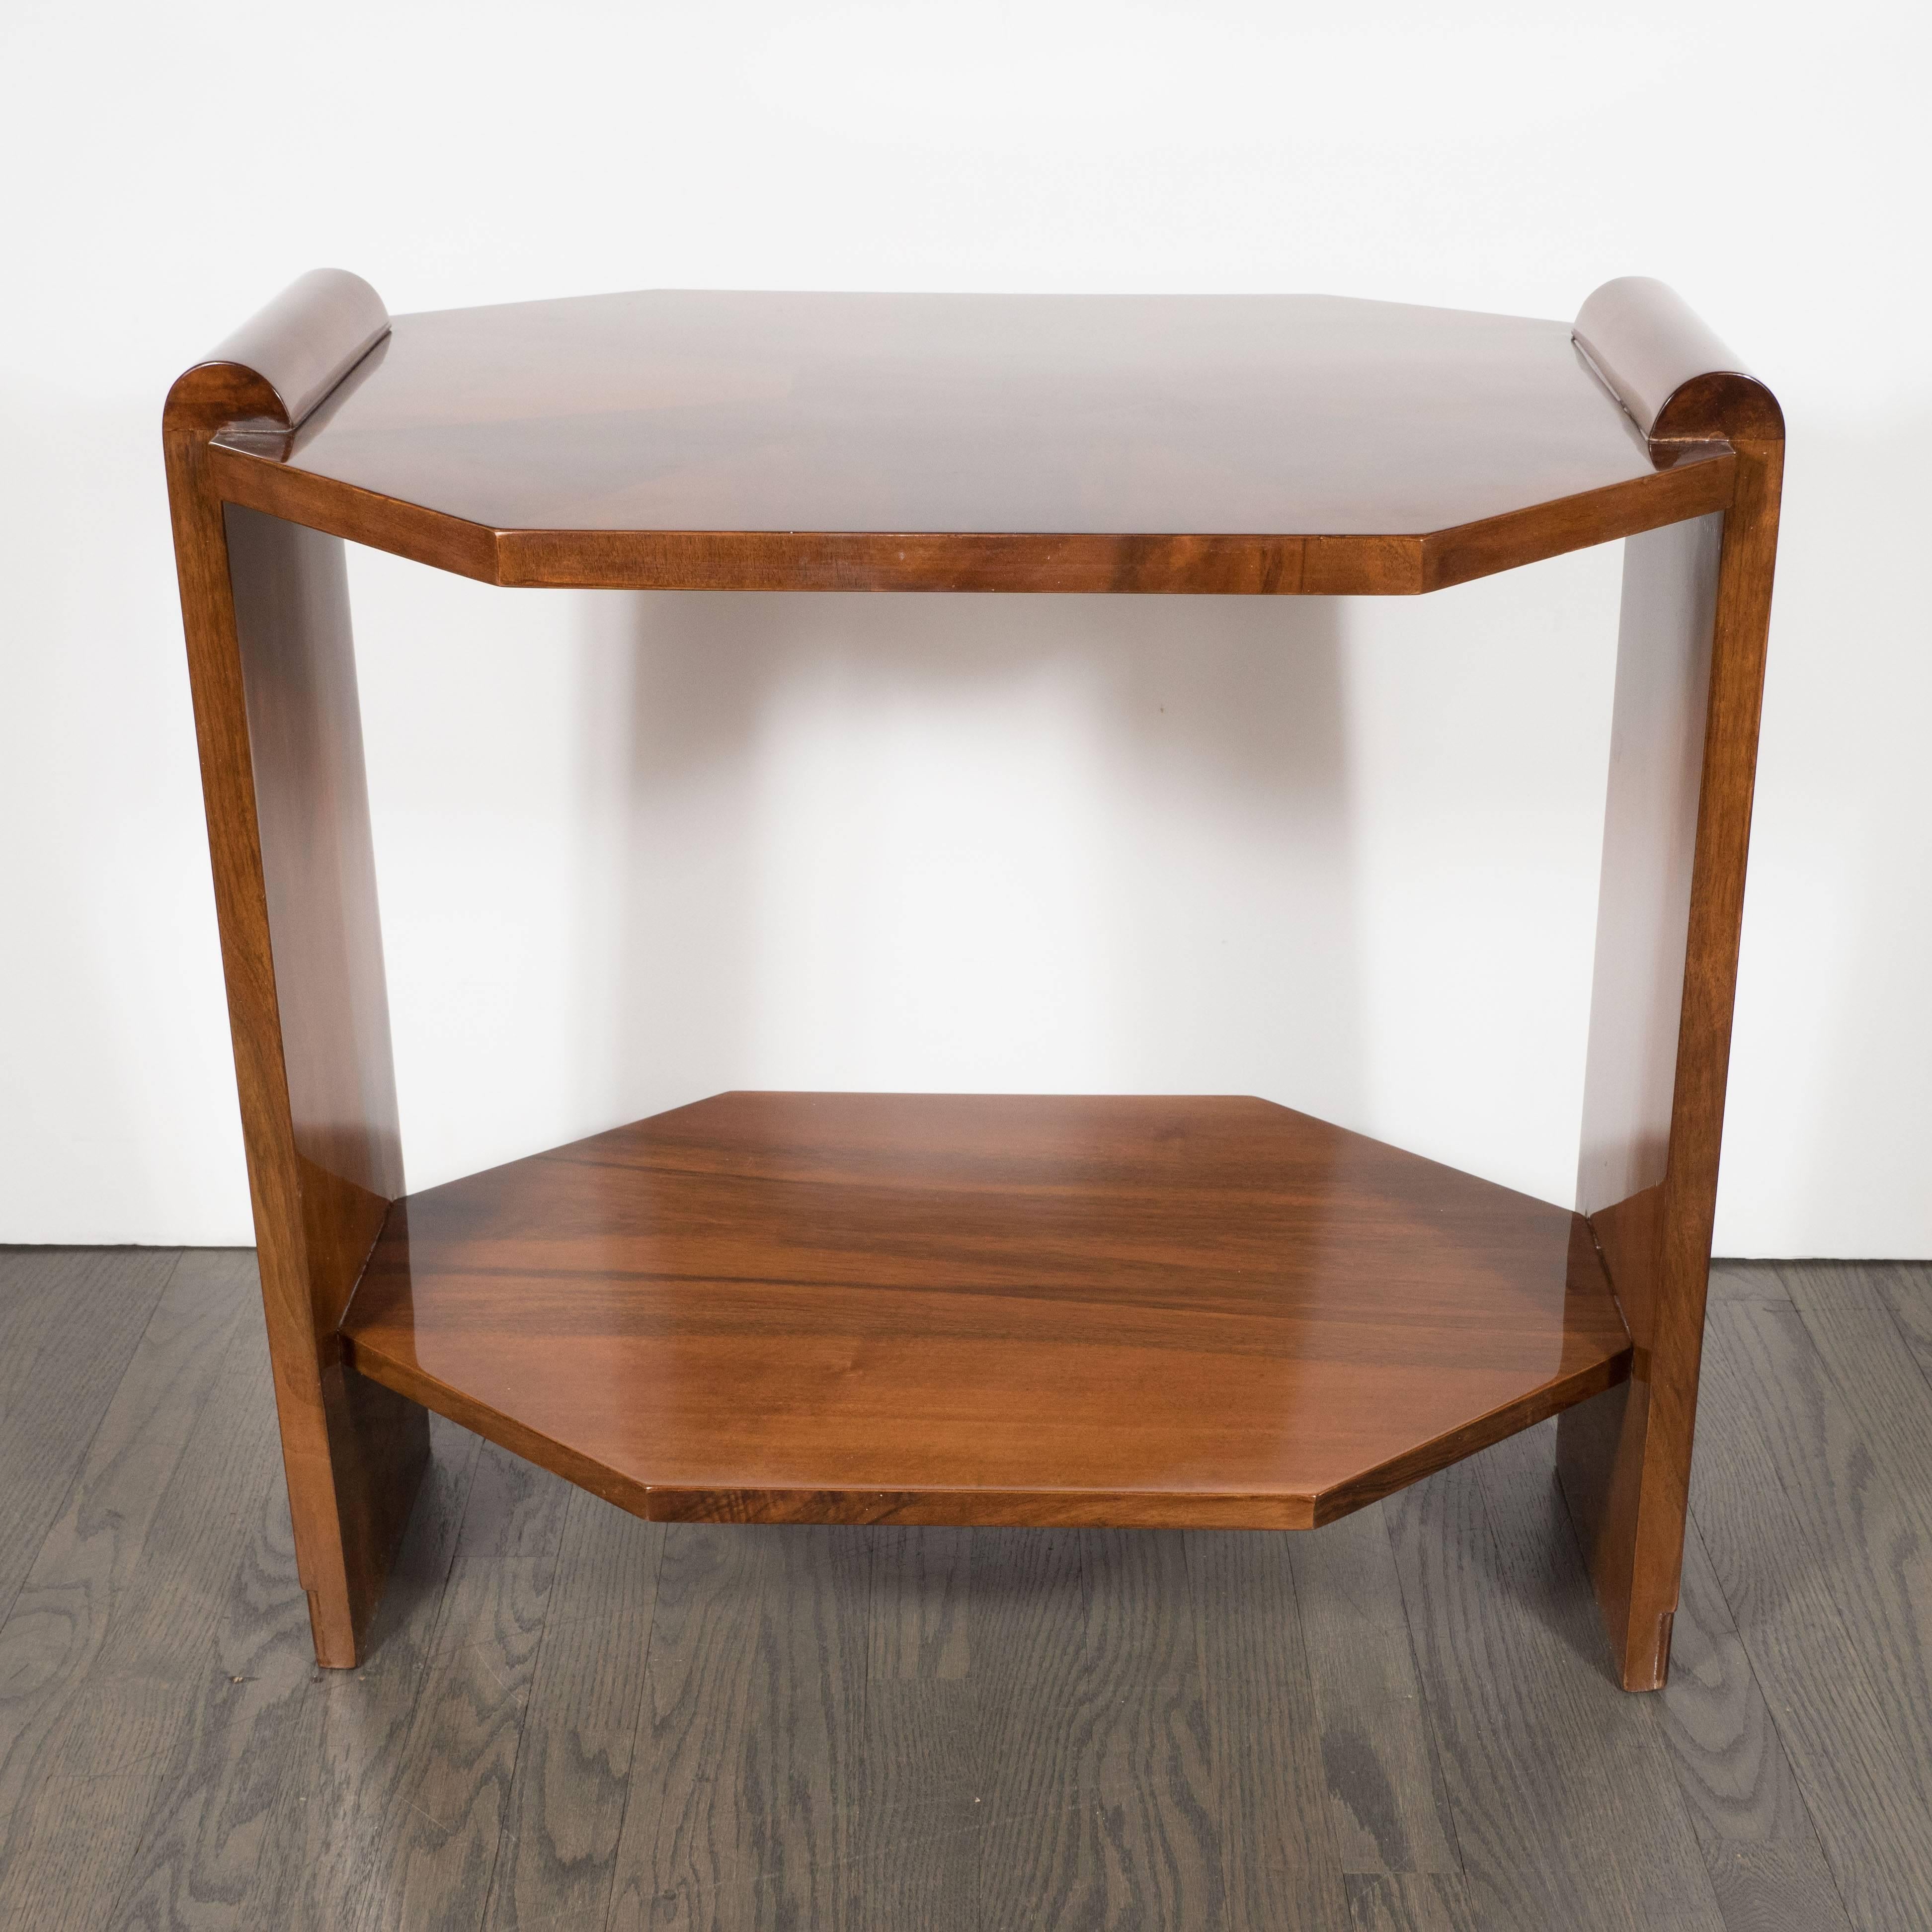 This sophisticated side occasional table features two tiers, scroll style arms with striated vertical incisions at the base, as well as inlaid and polished book-matched walnut in an octagonal geometric pattern. The top includes an octagon in the